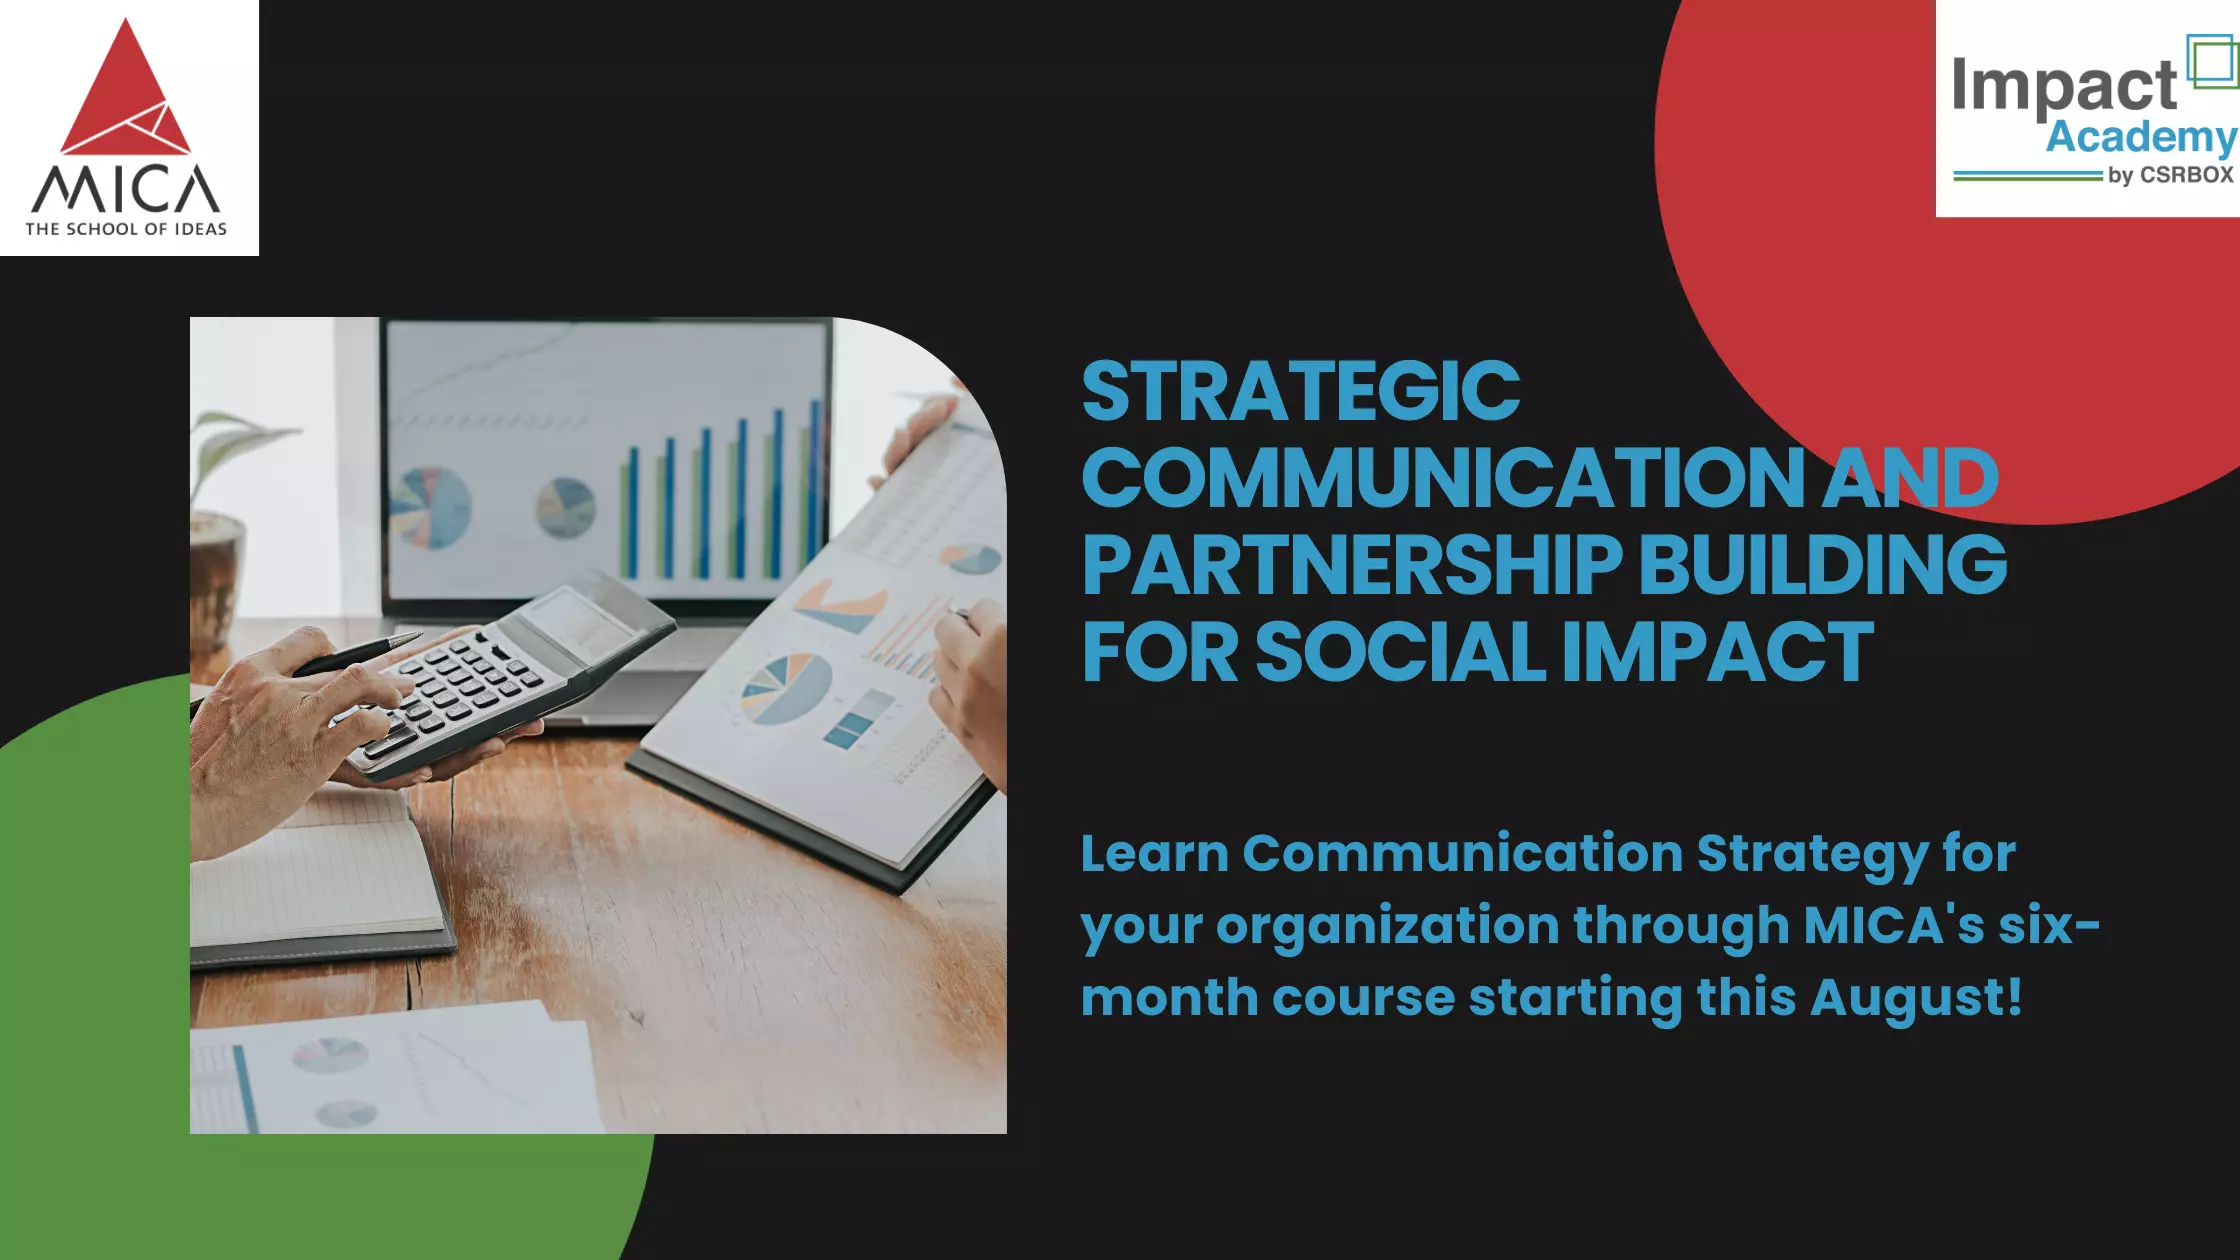 Register for Strategic Communication and Partnership Building for Social Impact by MICA